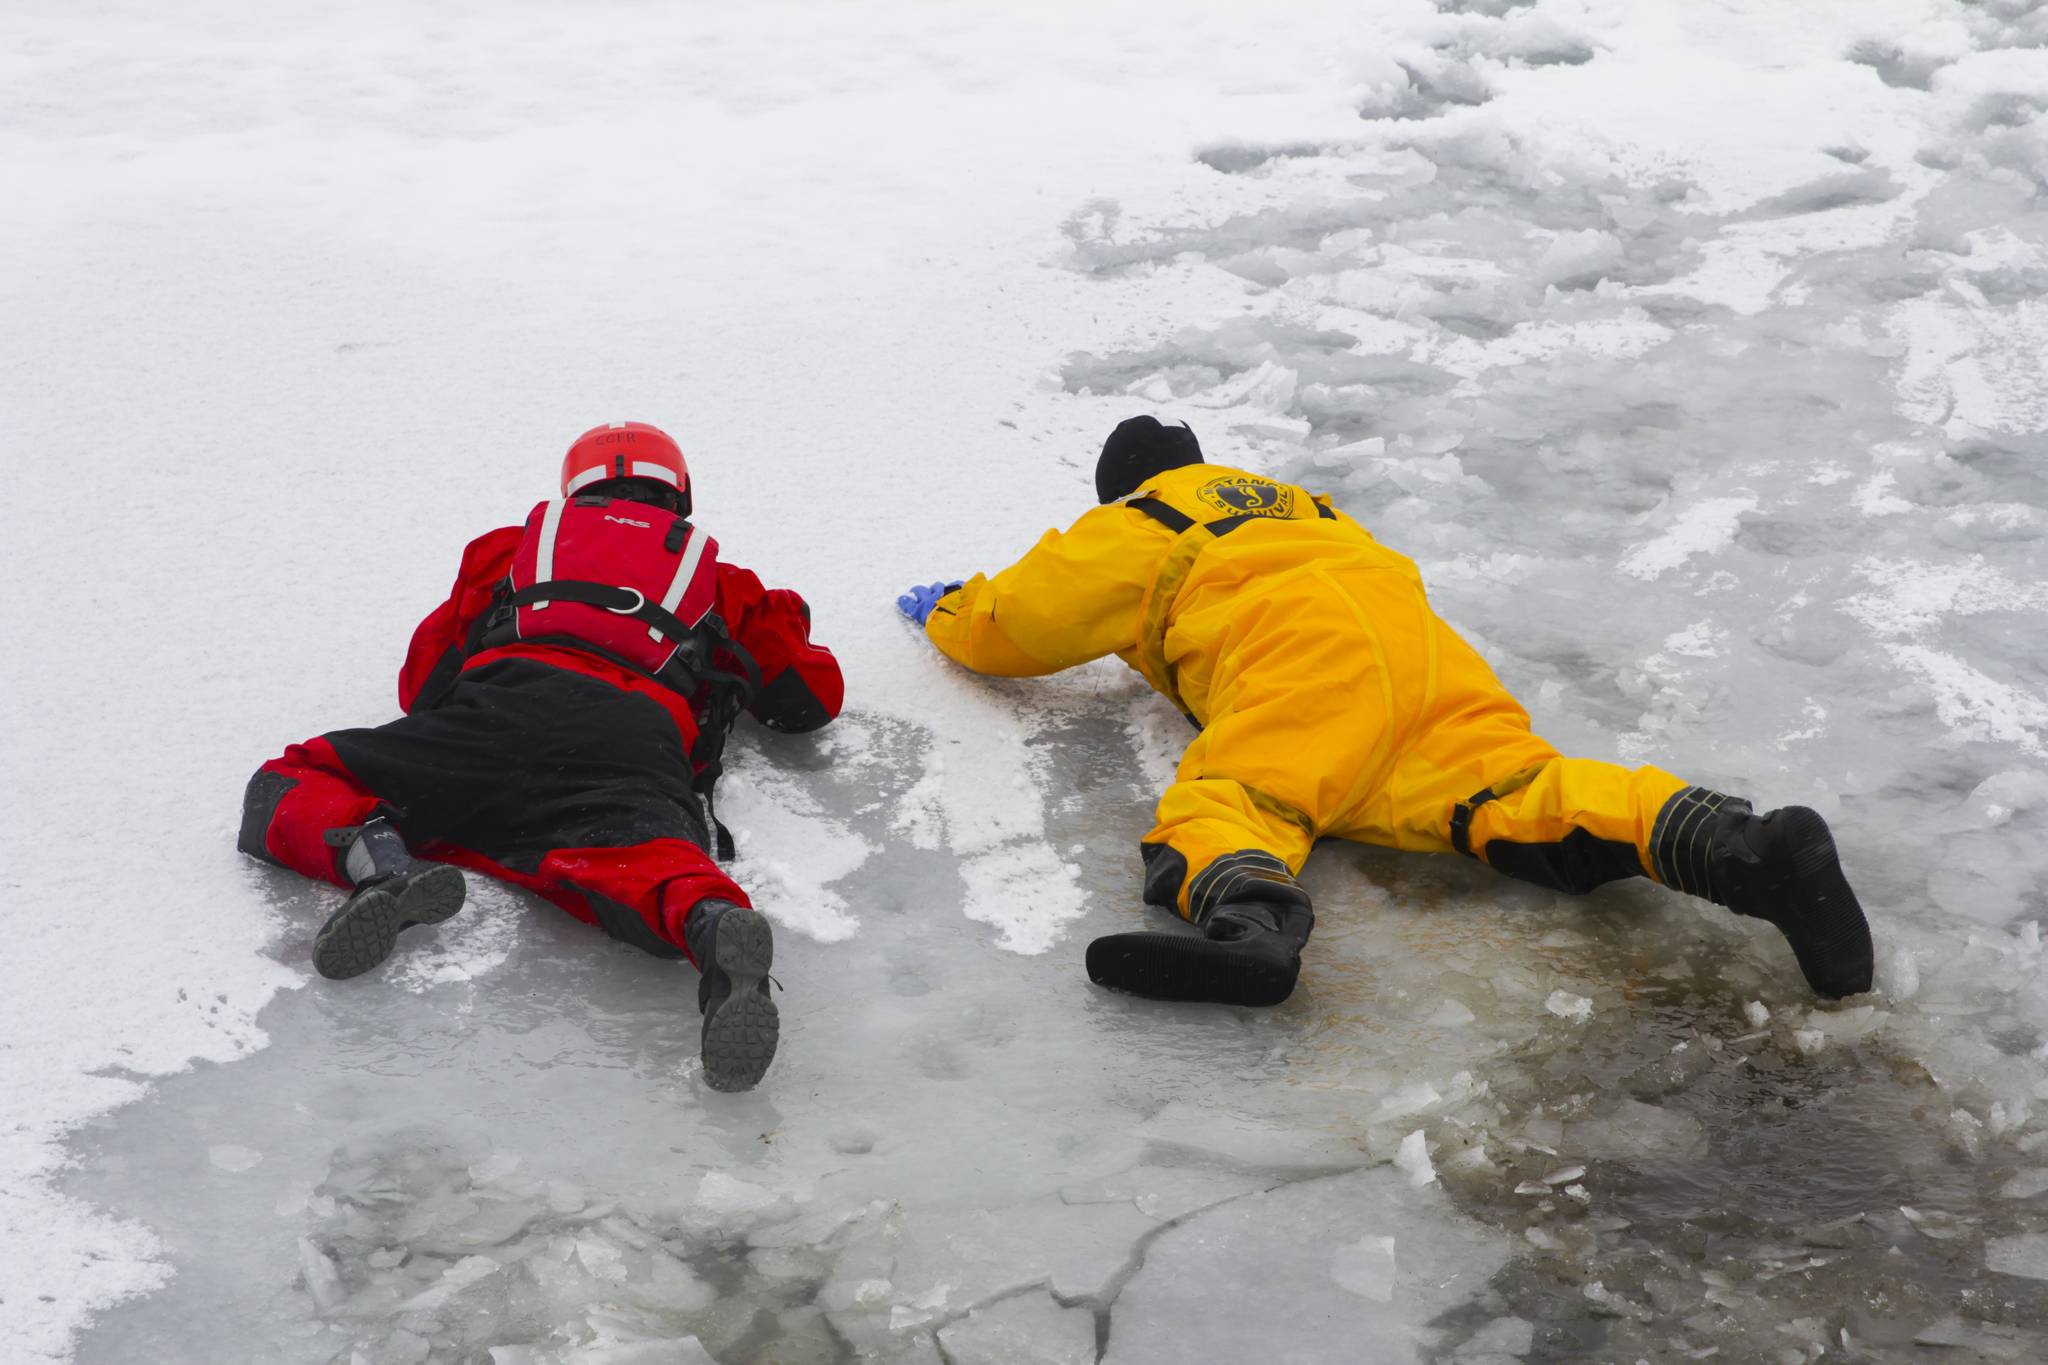 Capt. Jayme Johns, in yellow, head of the Capital City Fire/Rescue’s water rescue team, shows firefighter Liam Van Sickle, left, how to safely cross treacherous ice during CCFR’s annual ice rescue training at Twin Lakes on April 7, 2021. (Michael S. Lockett / Juneau Empire)